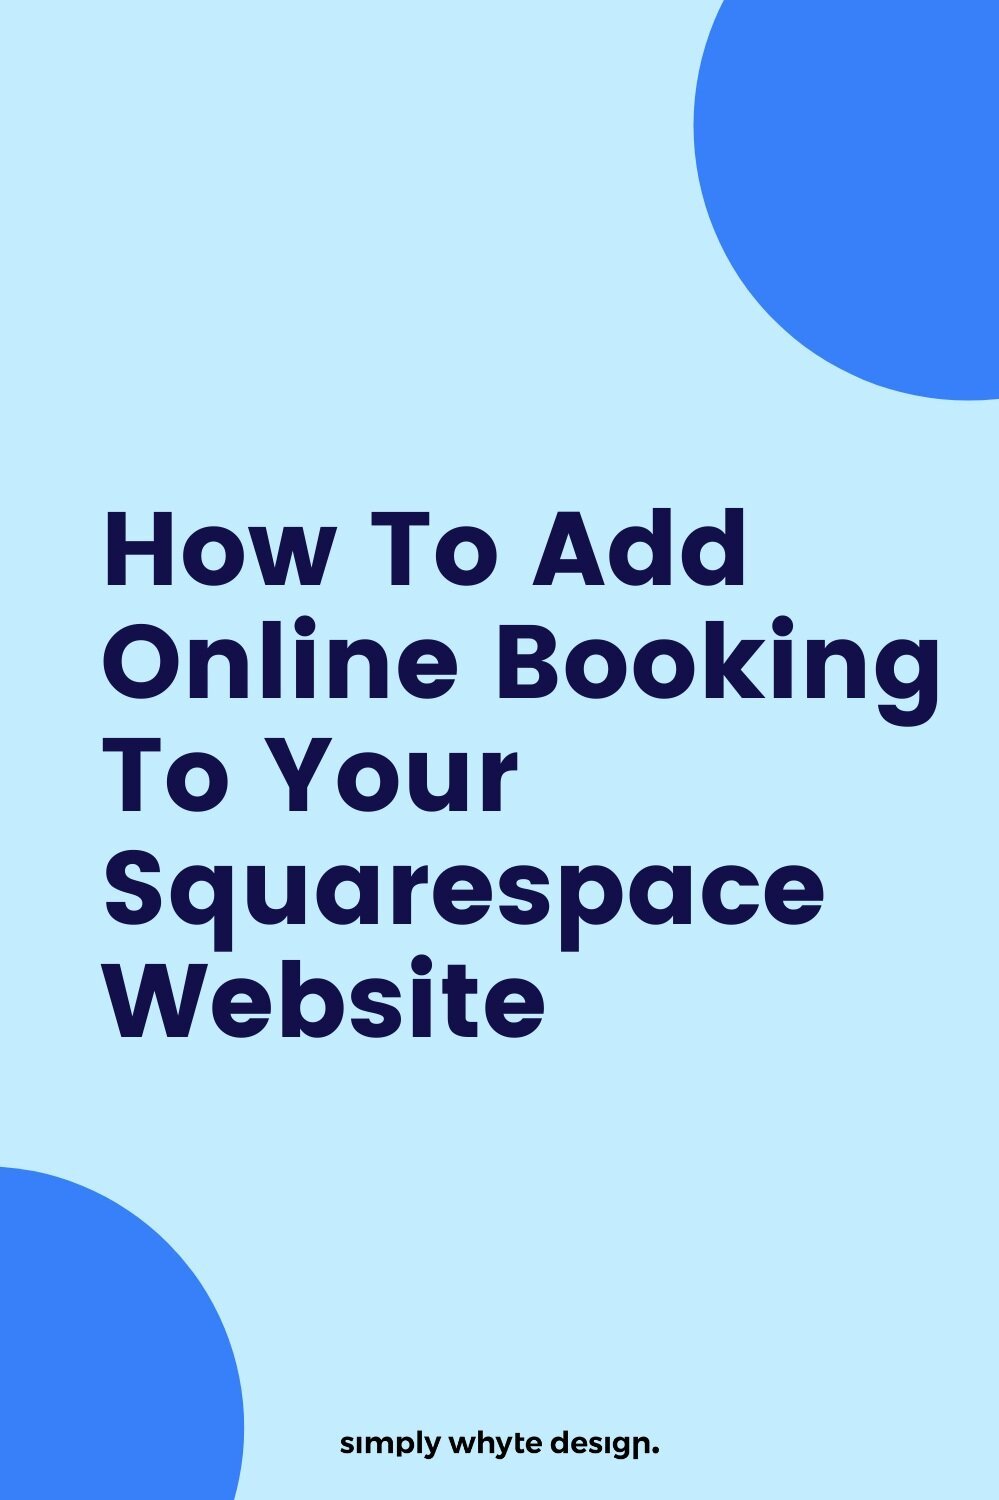 How+To+Add+Online+Booking+To+Your+Squarespace+Website.jpg